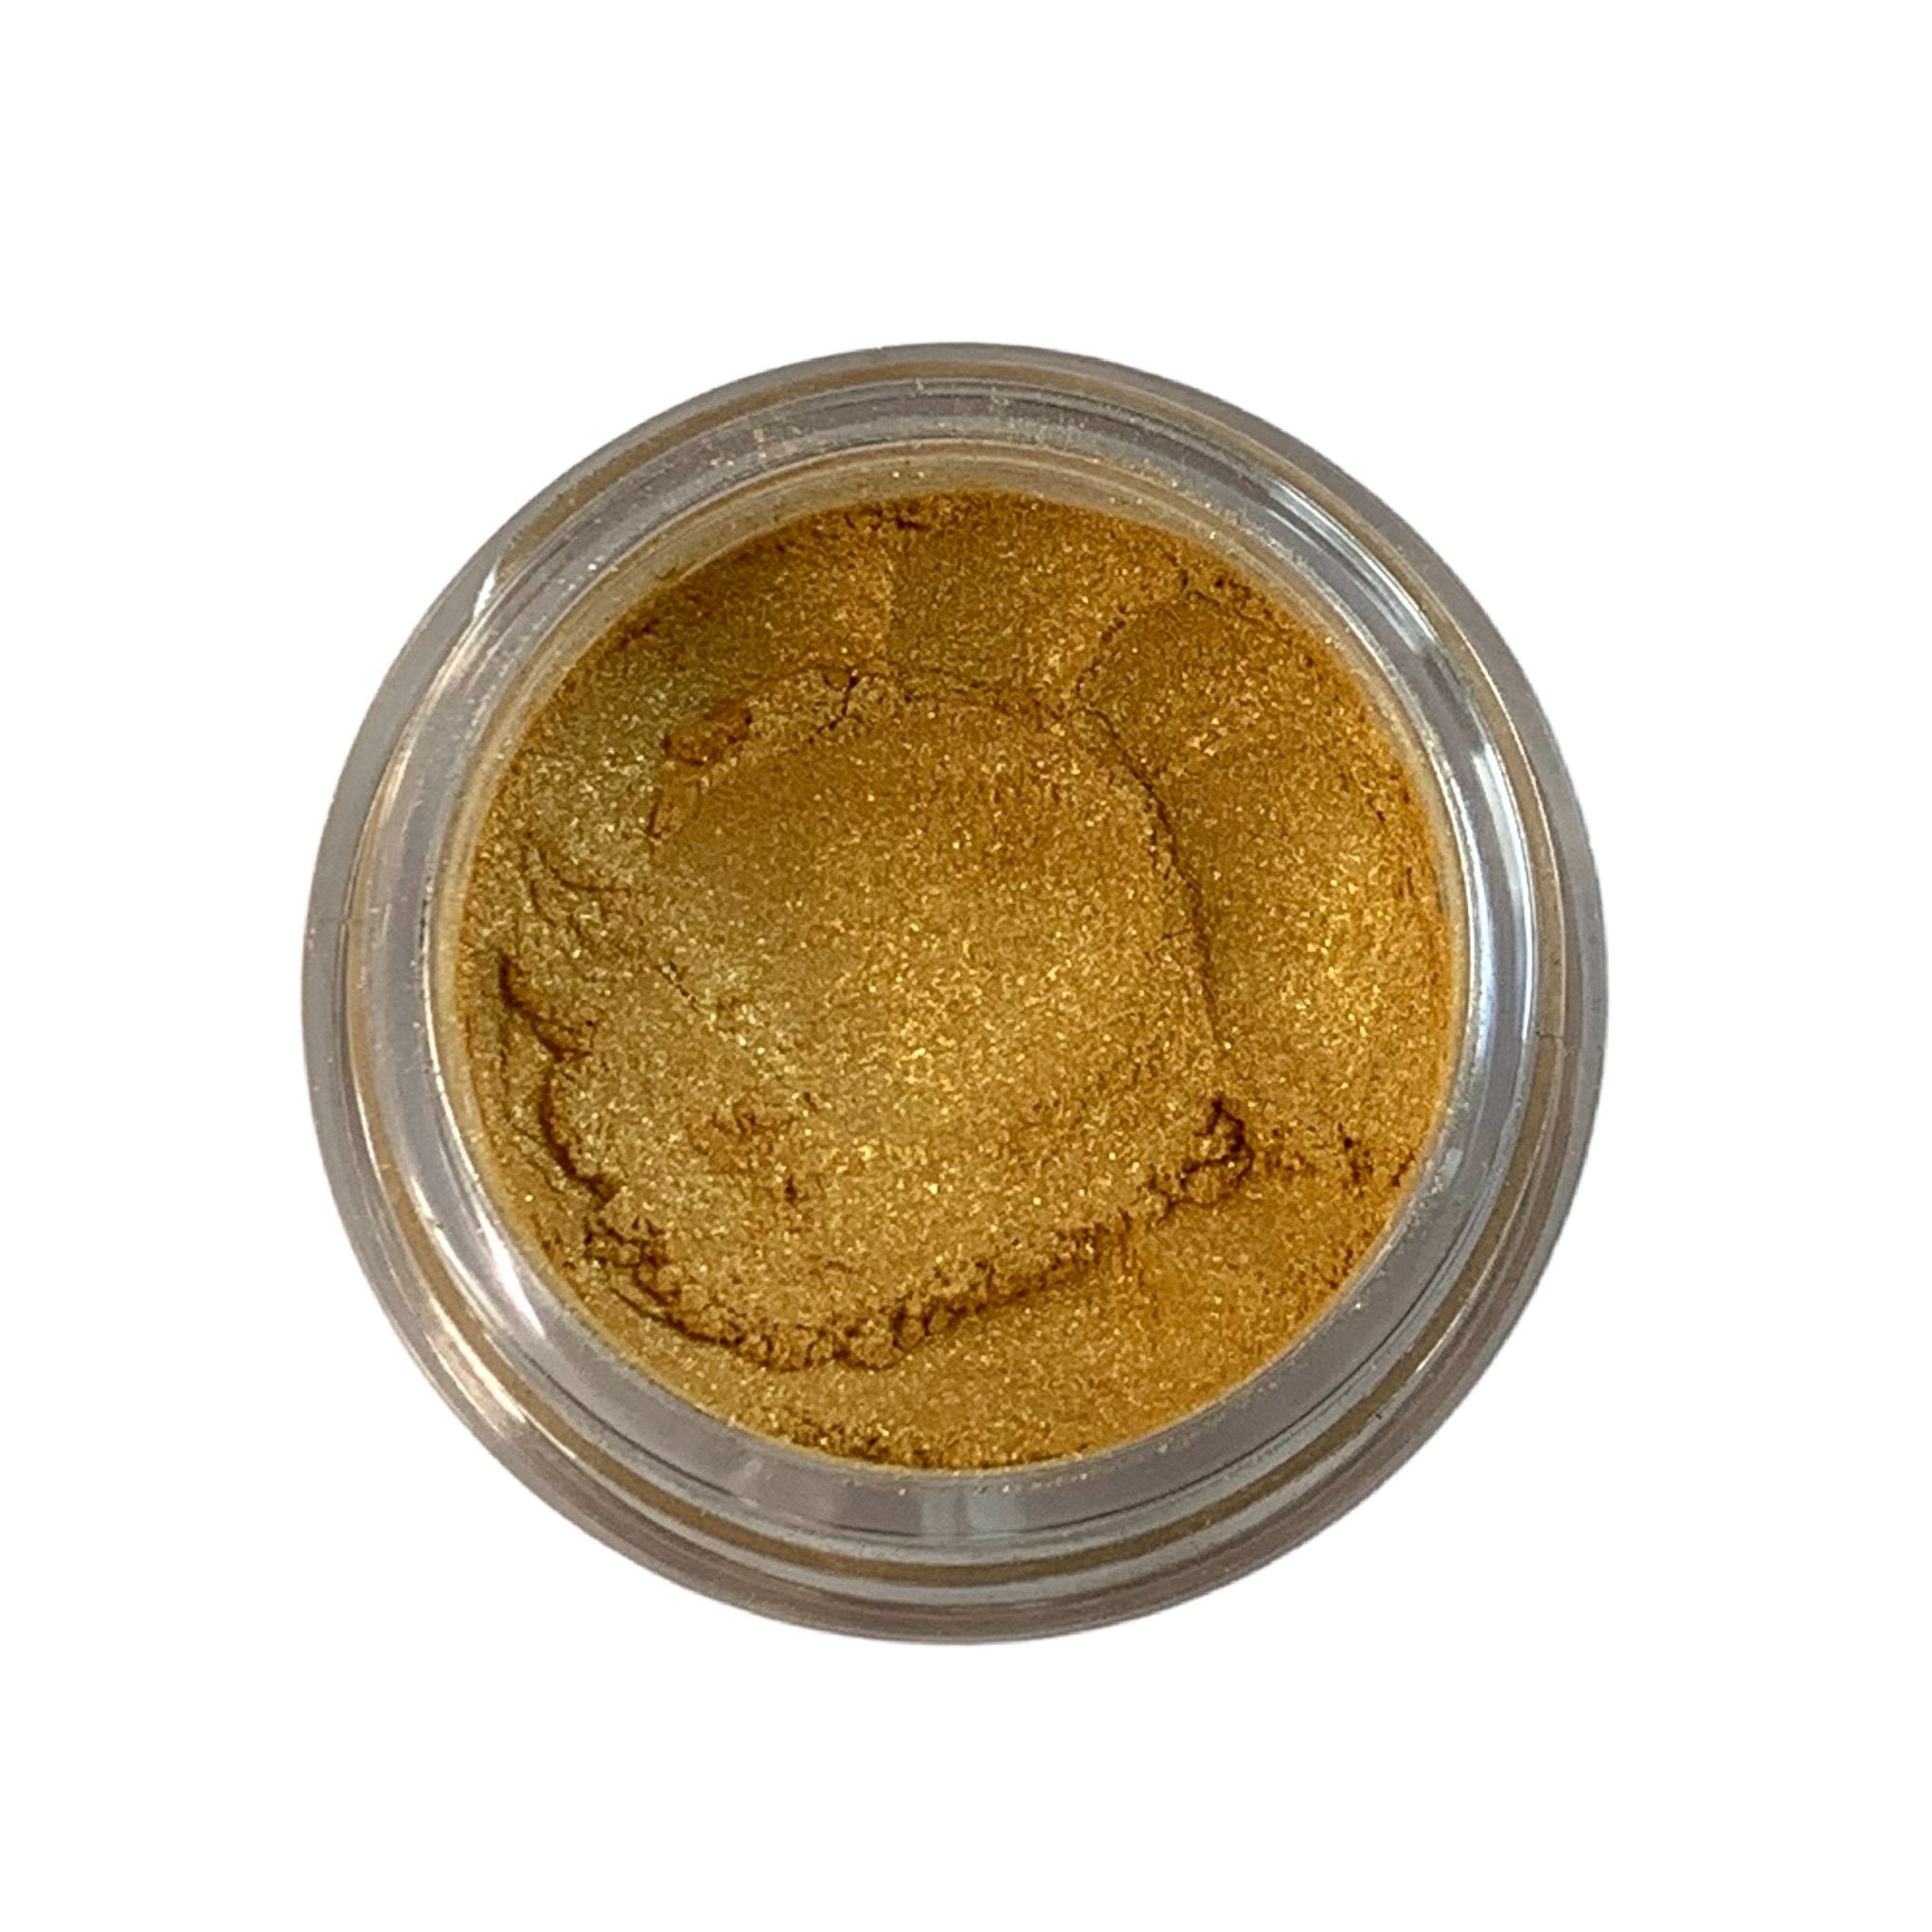 honey loose mineral eyeshadow, a shimmery gold color. 10gram sifter jar, vegan and cruelty free